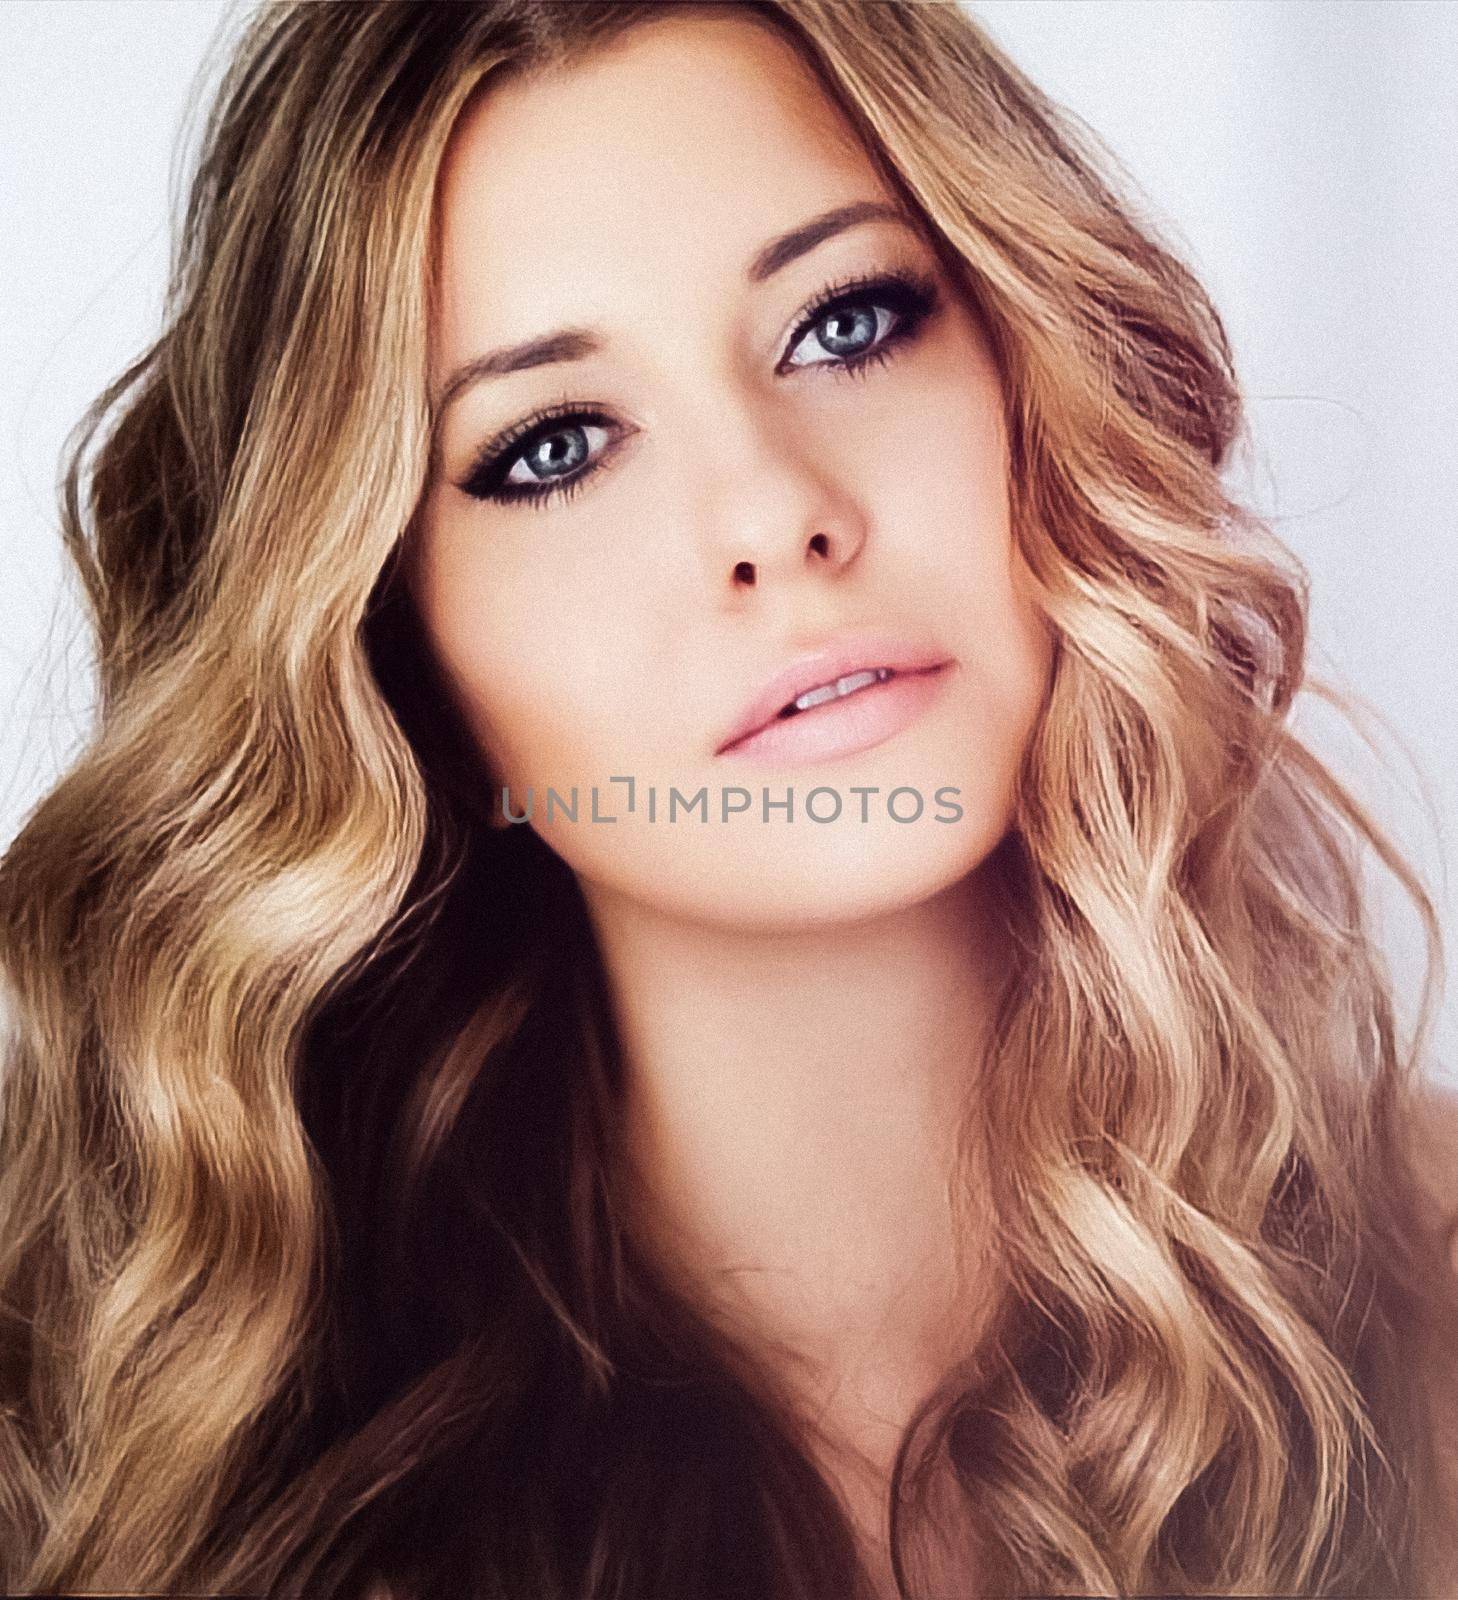 Beauty, makeup and glamour look. Beautiful blonde woman with curly hairstyle and smokey eyes evening make-up, closeup fashion portrait with retro film grain effect.